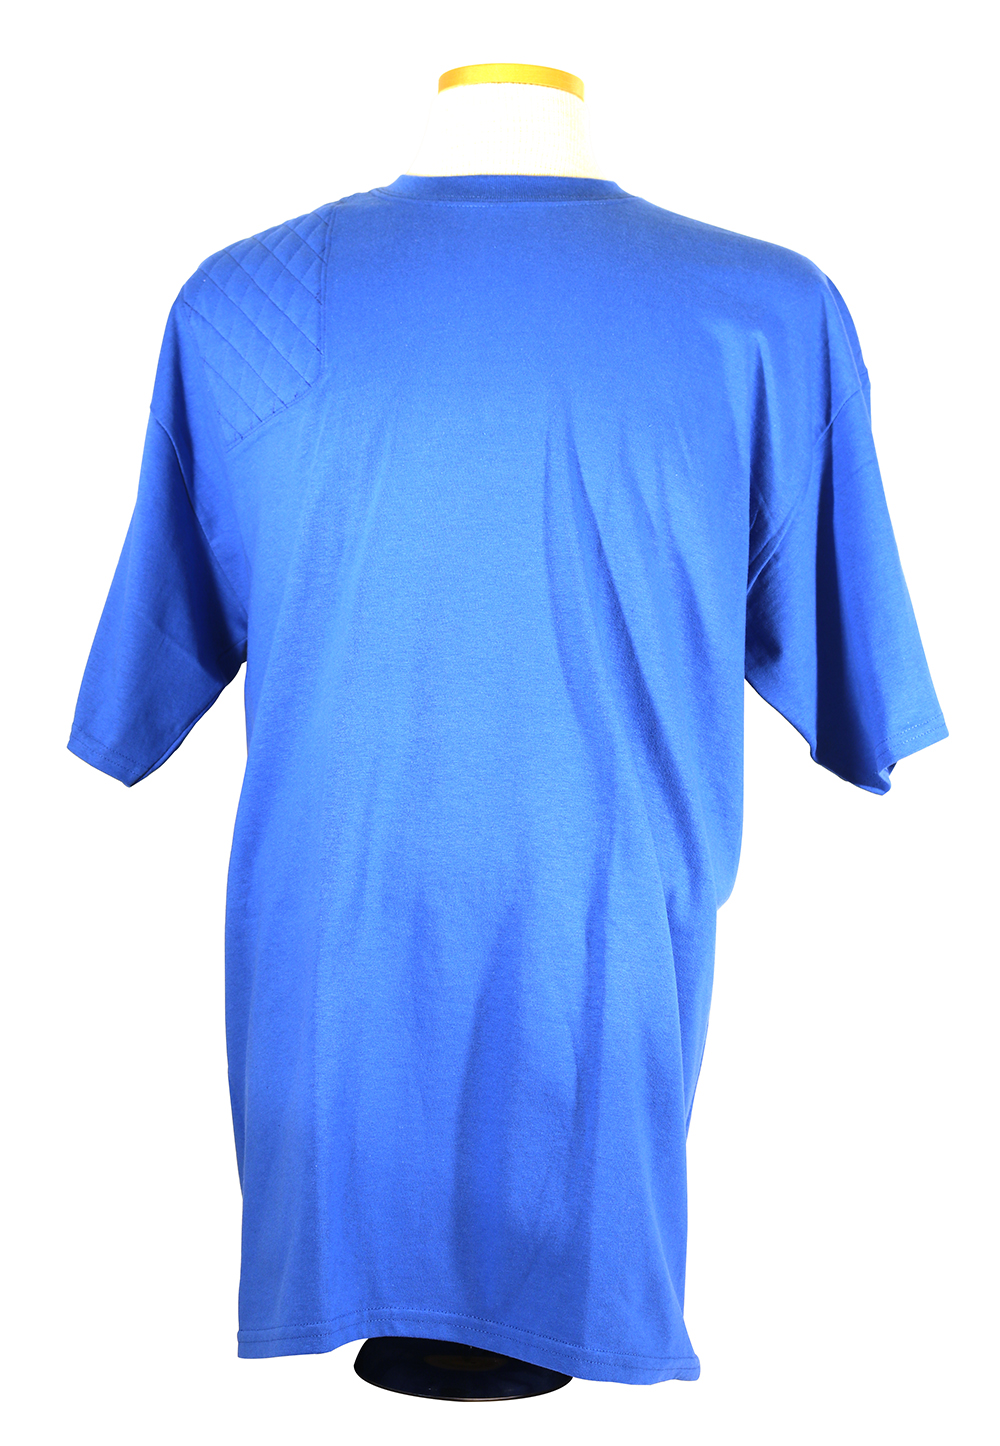 #2000T Tall Cotton Tee - Right hand, Single layer Pad, Royal Blue